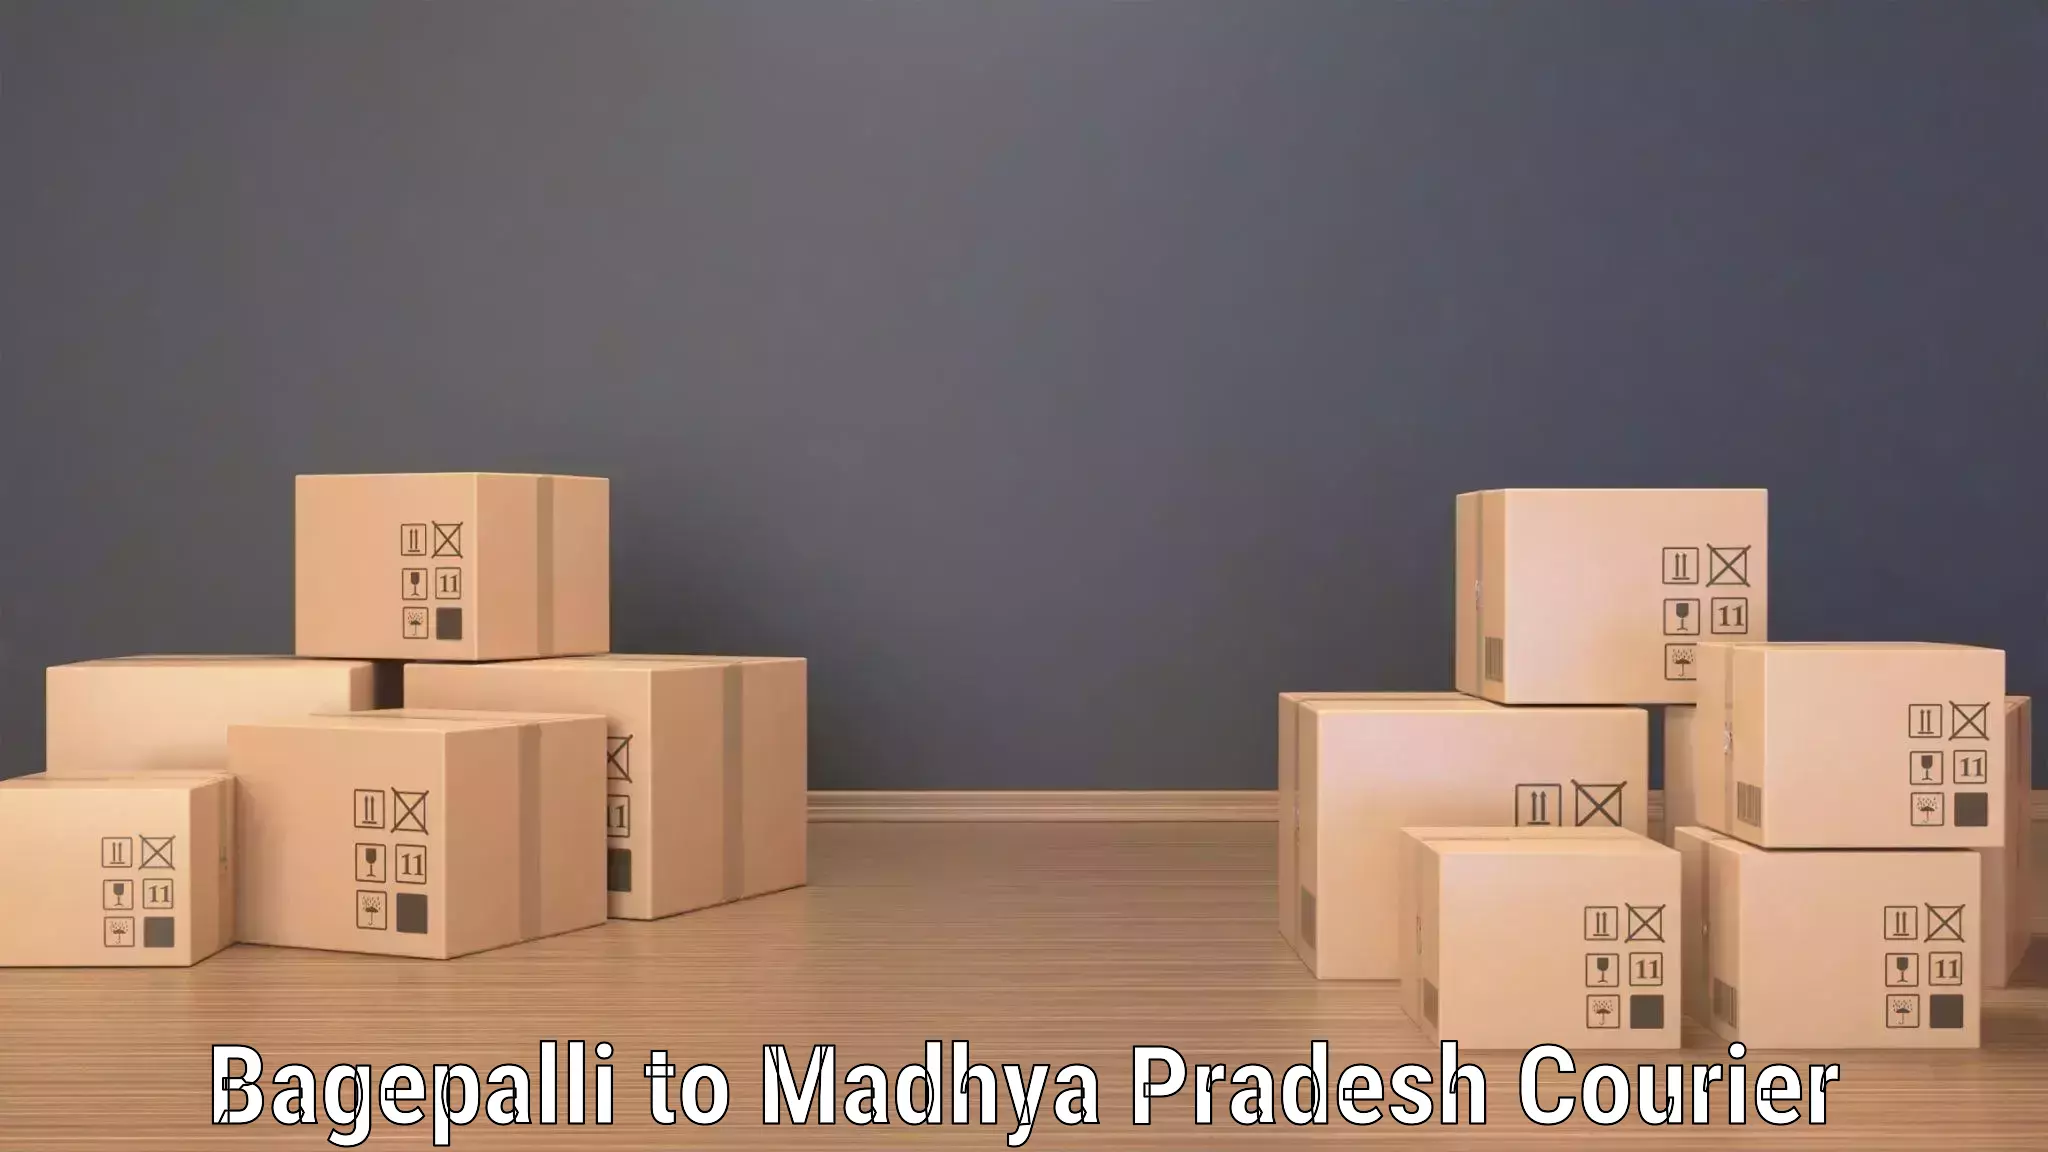 Package delivery network Bagepalli to Nalkheda